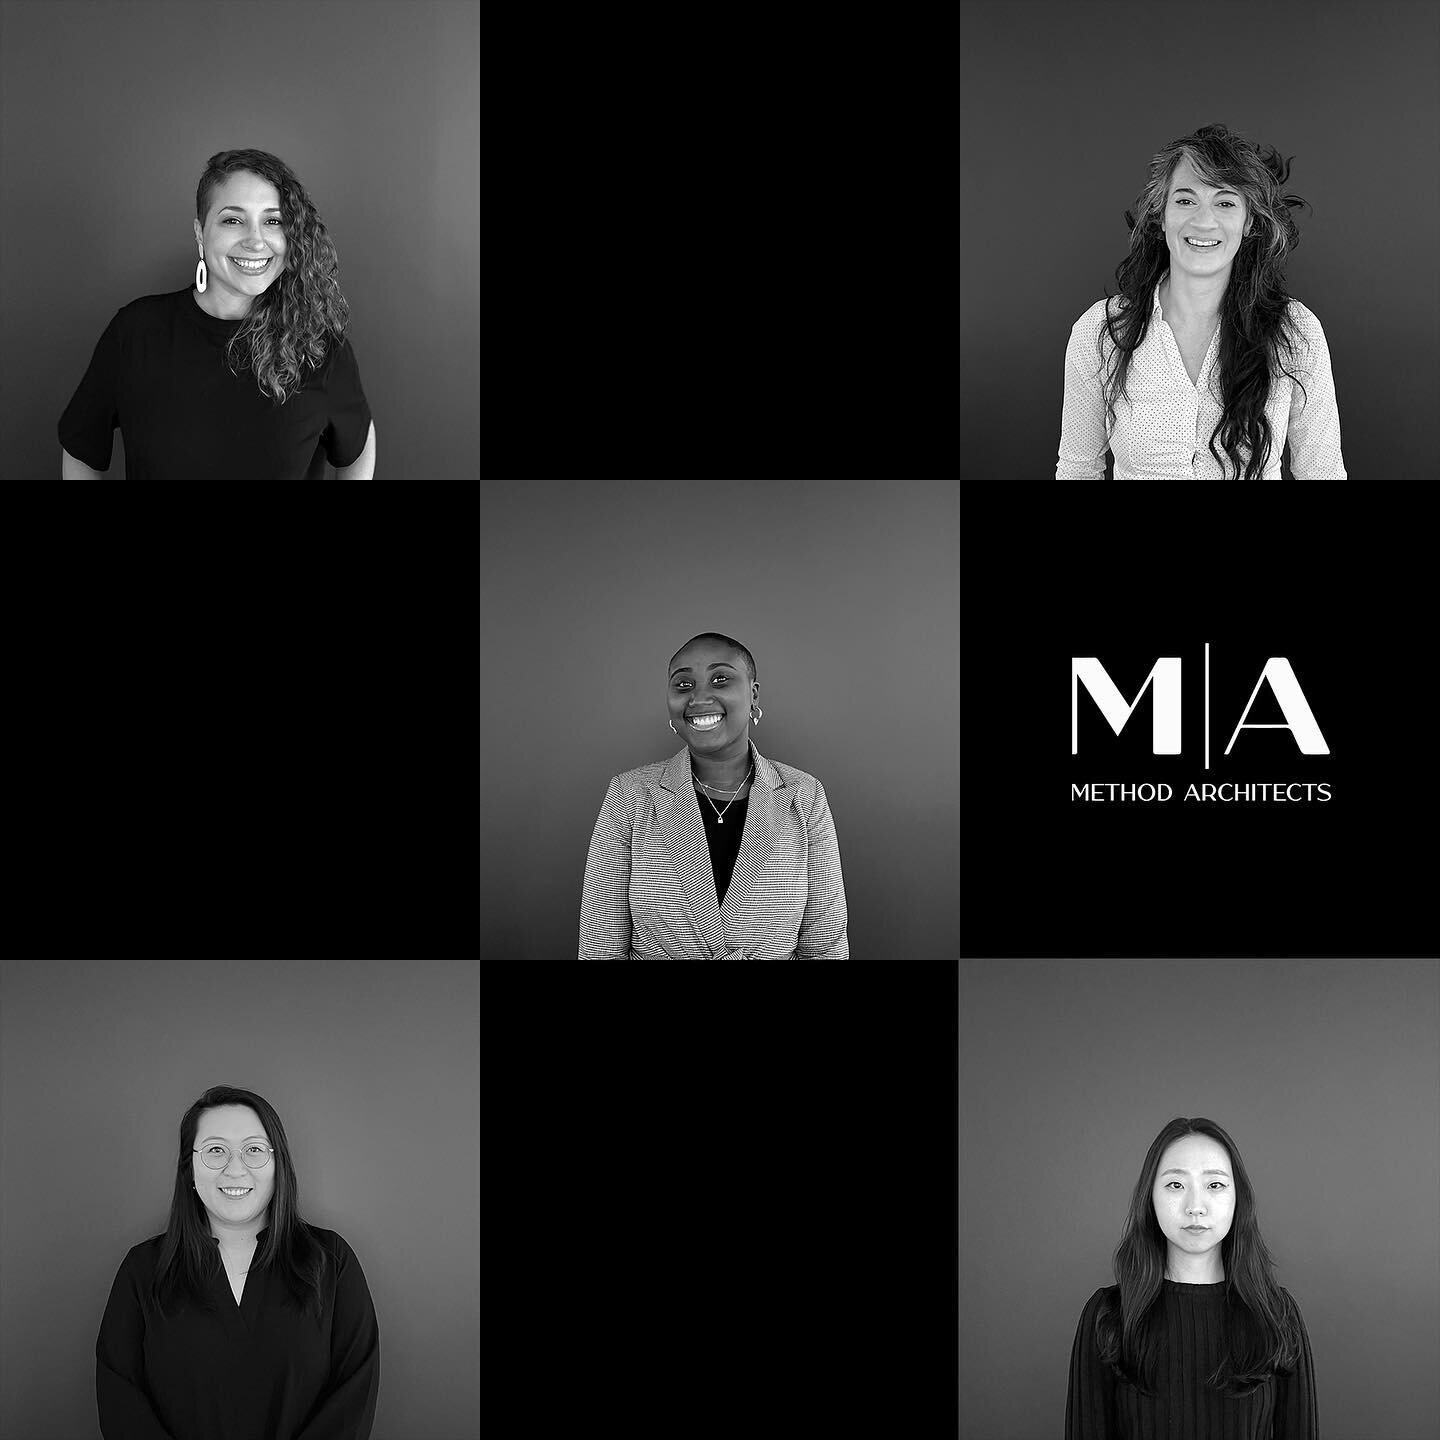 International Women&rsquo;s Day - Method acknowledges the women that make us who we are today, and inspire and drive our progress for tomorrow. 

Thank all of you for bringing so much to our team, culture and success. 

#IWD #methodarchitects